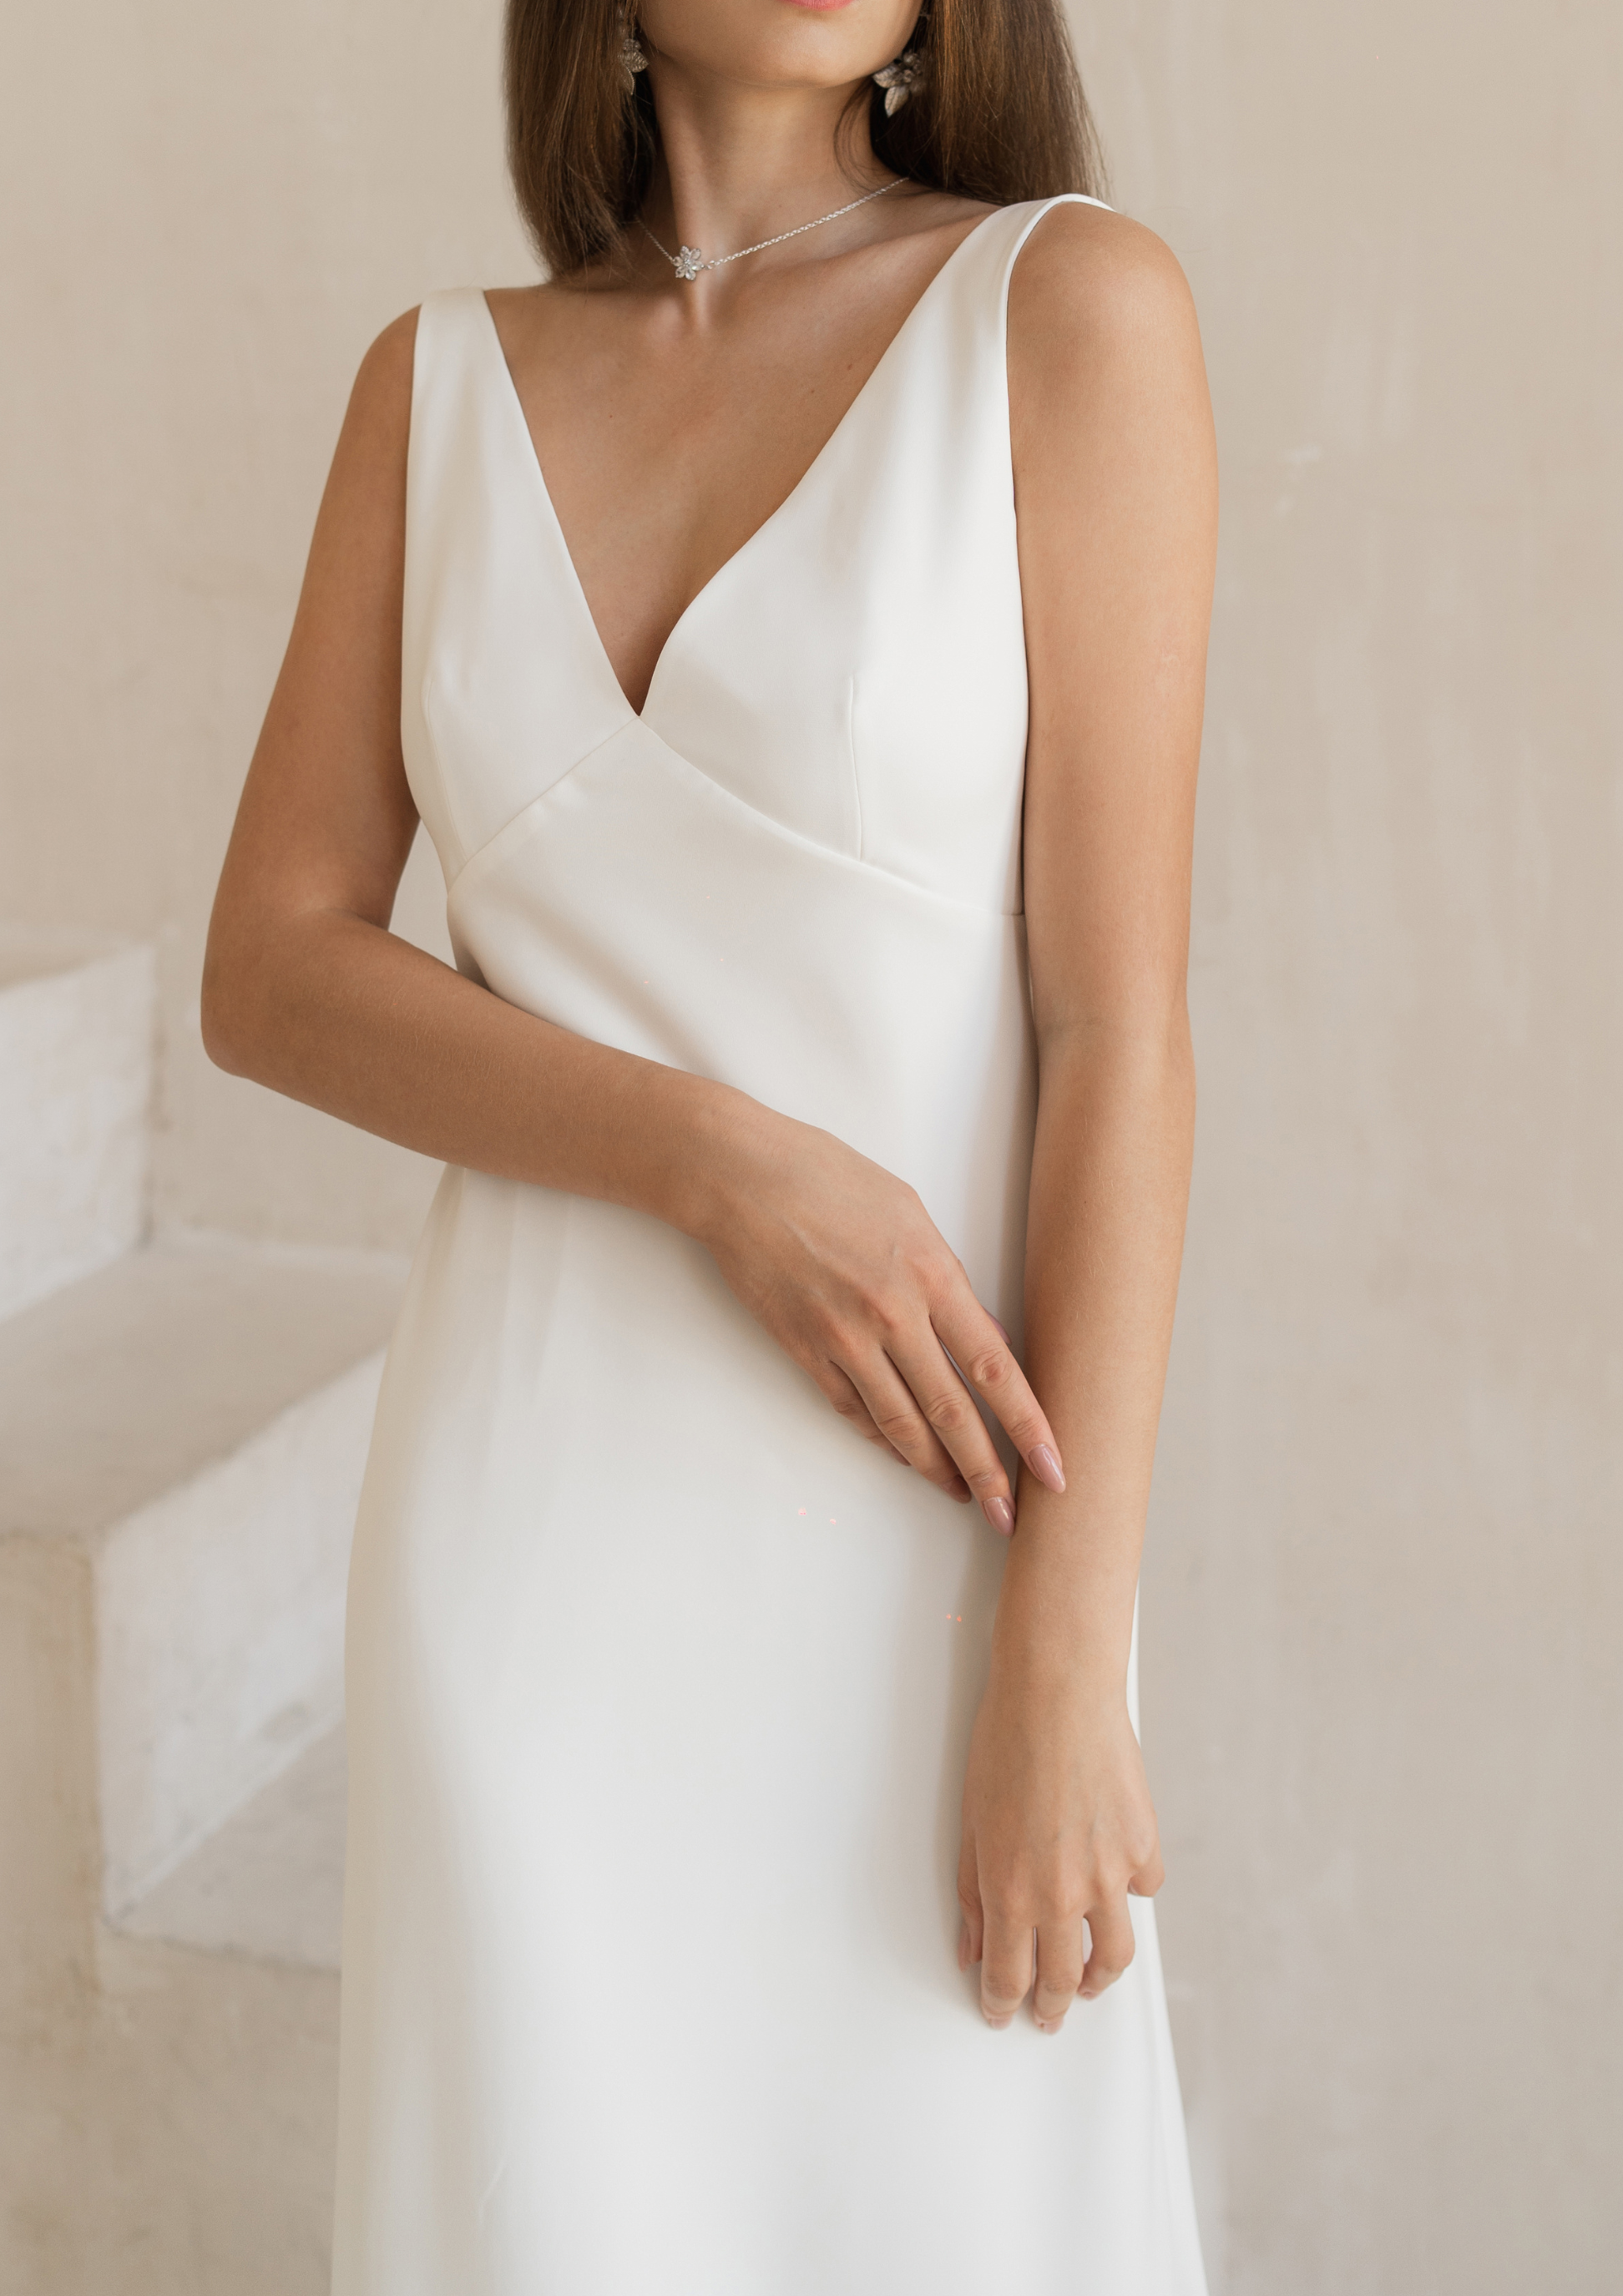 These dresses provide a blank canvas for brides to accessorize and personalize, allowing them to showcase their unique style through accessories such as statement jewelry, veils, or waist belts